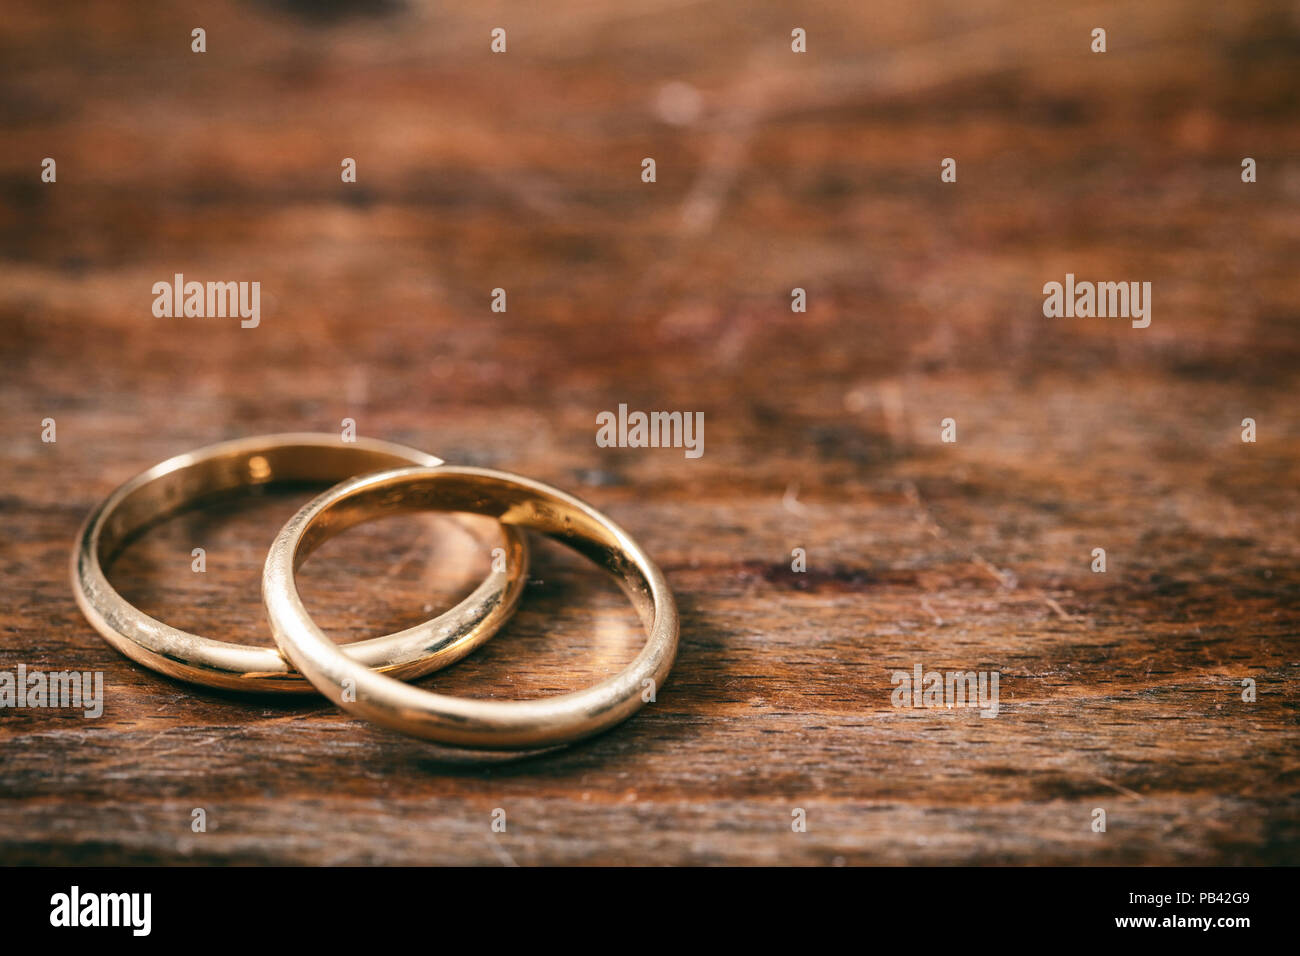 A pair of golden wedding rings on wooden background, copy space Stock Photo